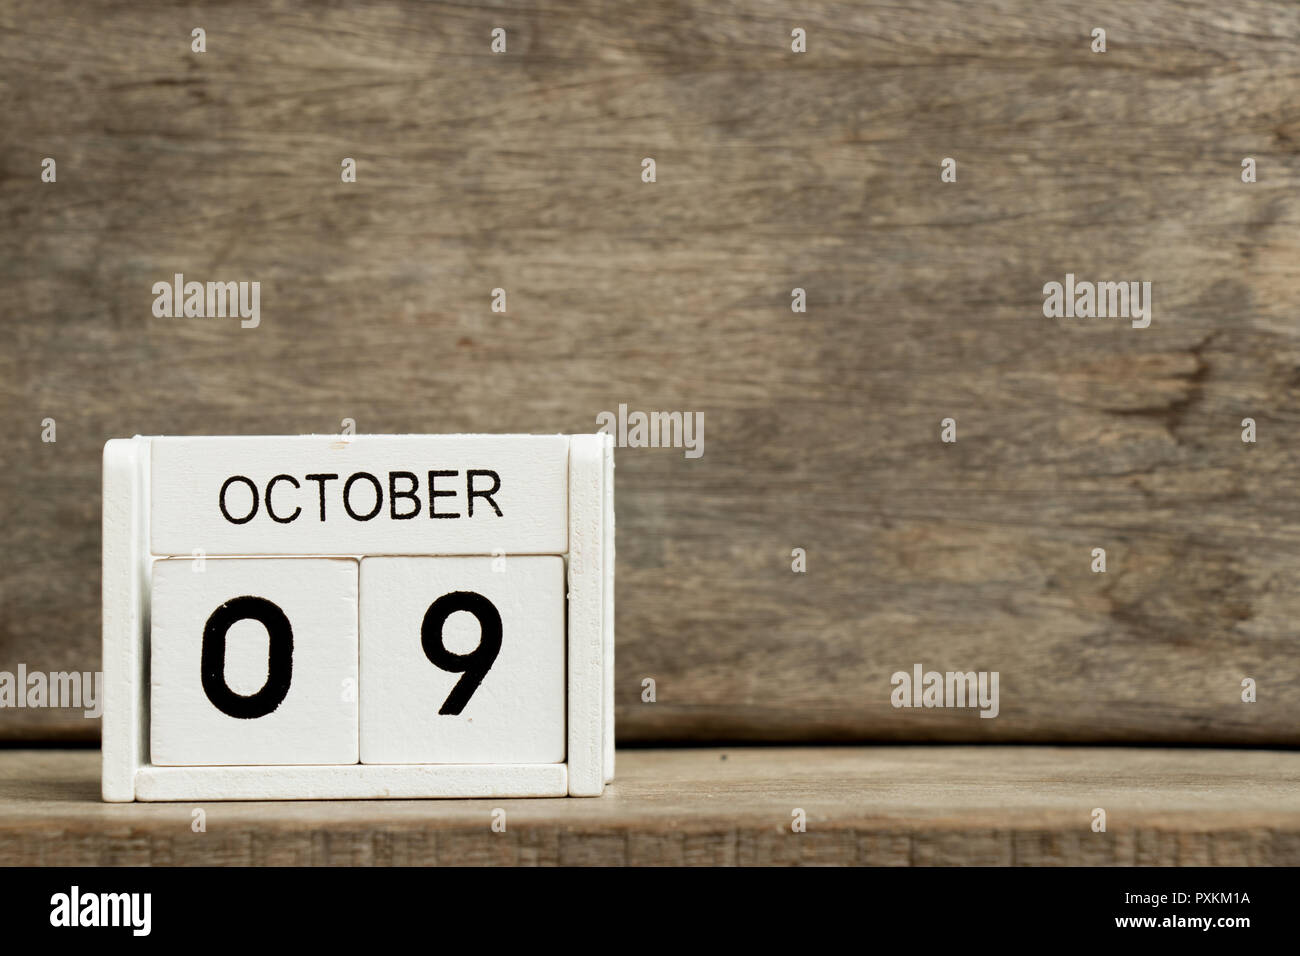 White block calendar present date 9 and month October on wood background (Day of fire prevention, hangul in south korea) Stock Photo